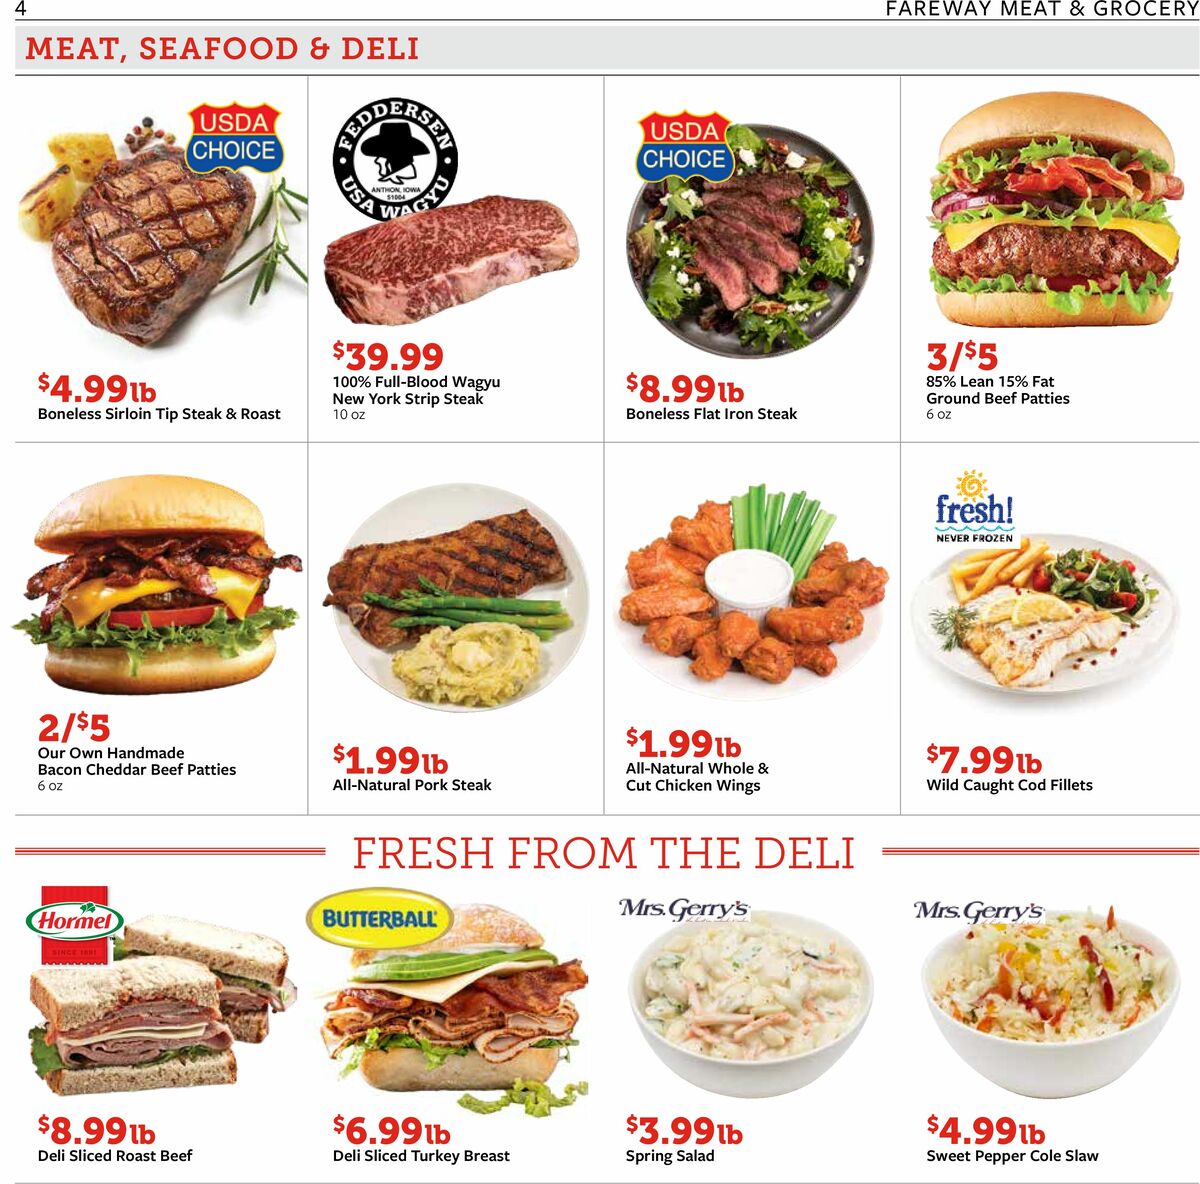 Fareway Weekly Ad from August 28